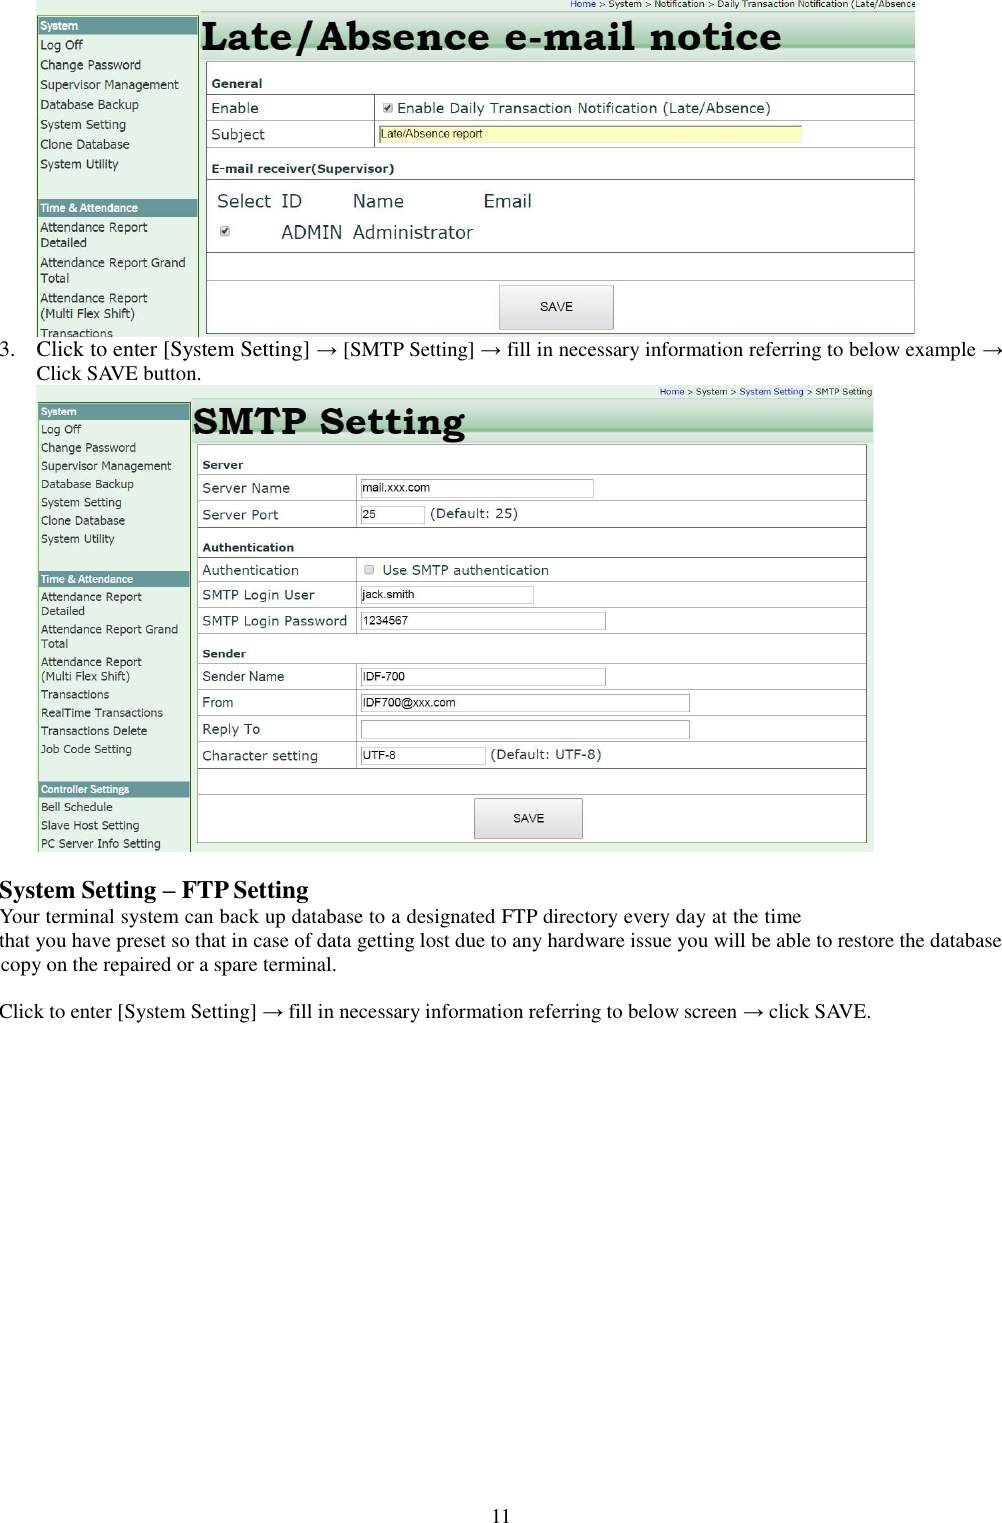  11  3. Click to enter [System Setting] → [SMTP Setting] → fill in necessary information referring to below example → Click SAVE button.   System Setting – FTP Setting that you have preset so that in case of data getting lost due to any hardware issue you will be able to restore the database     Click to enter [System Setting] → fill in necessary information referring to below screen → click SAVE. Your terminal system can back up database to a designated FTP directory every day at the time  copy on the repaired or a spare terminal.